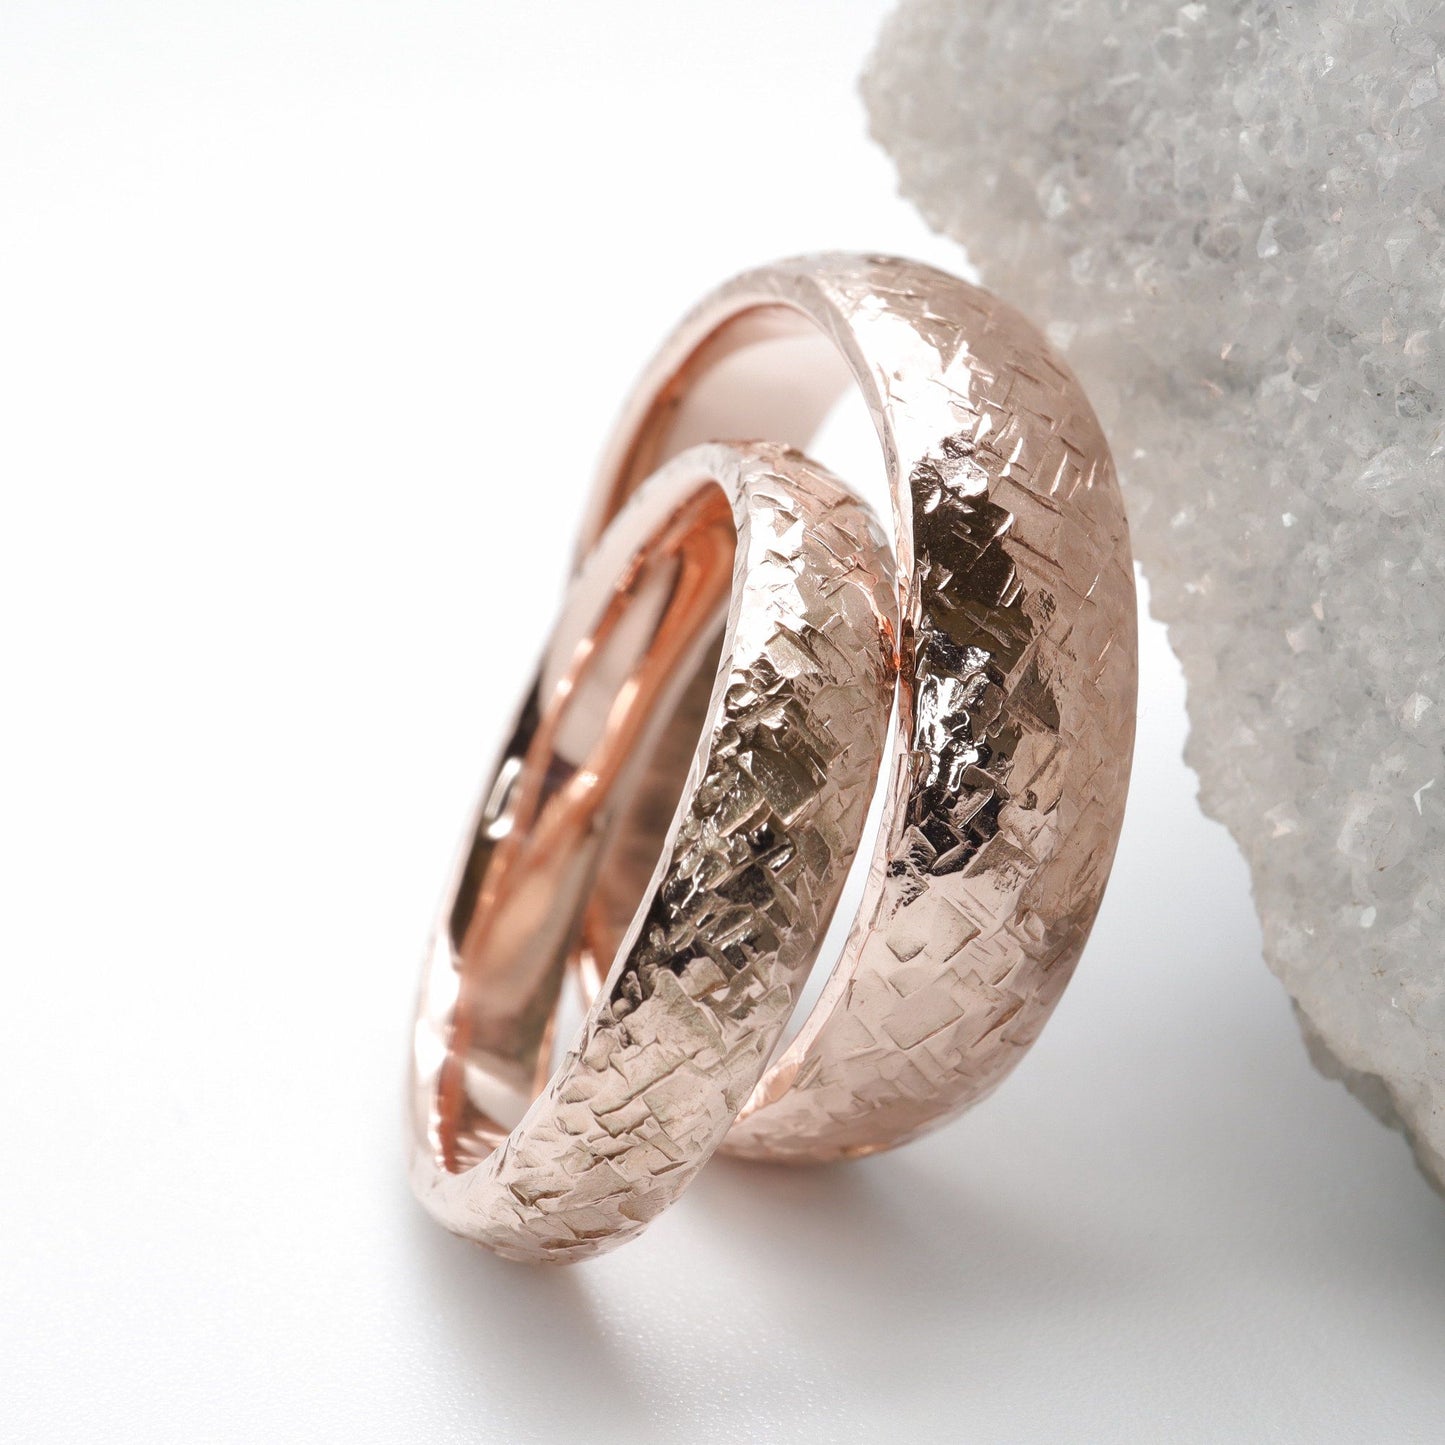 Fire Hammered matching rose gold set, 4mm and 6mm wedding designs.